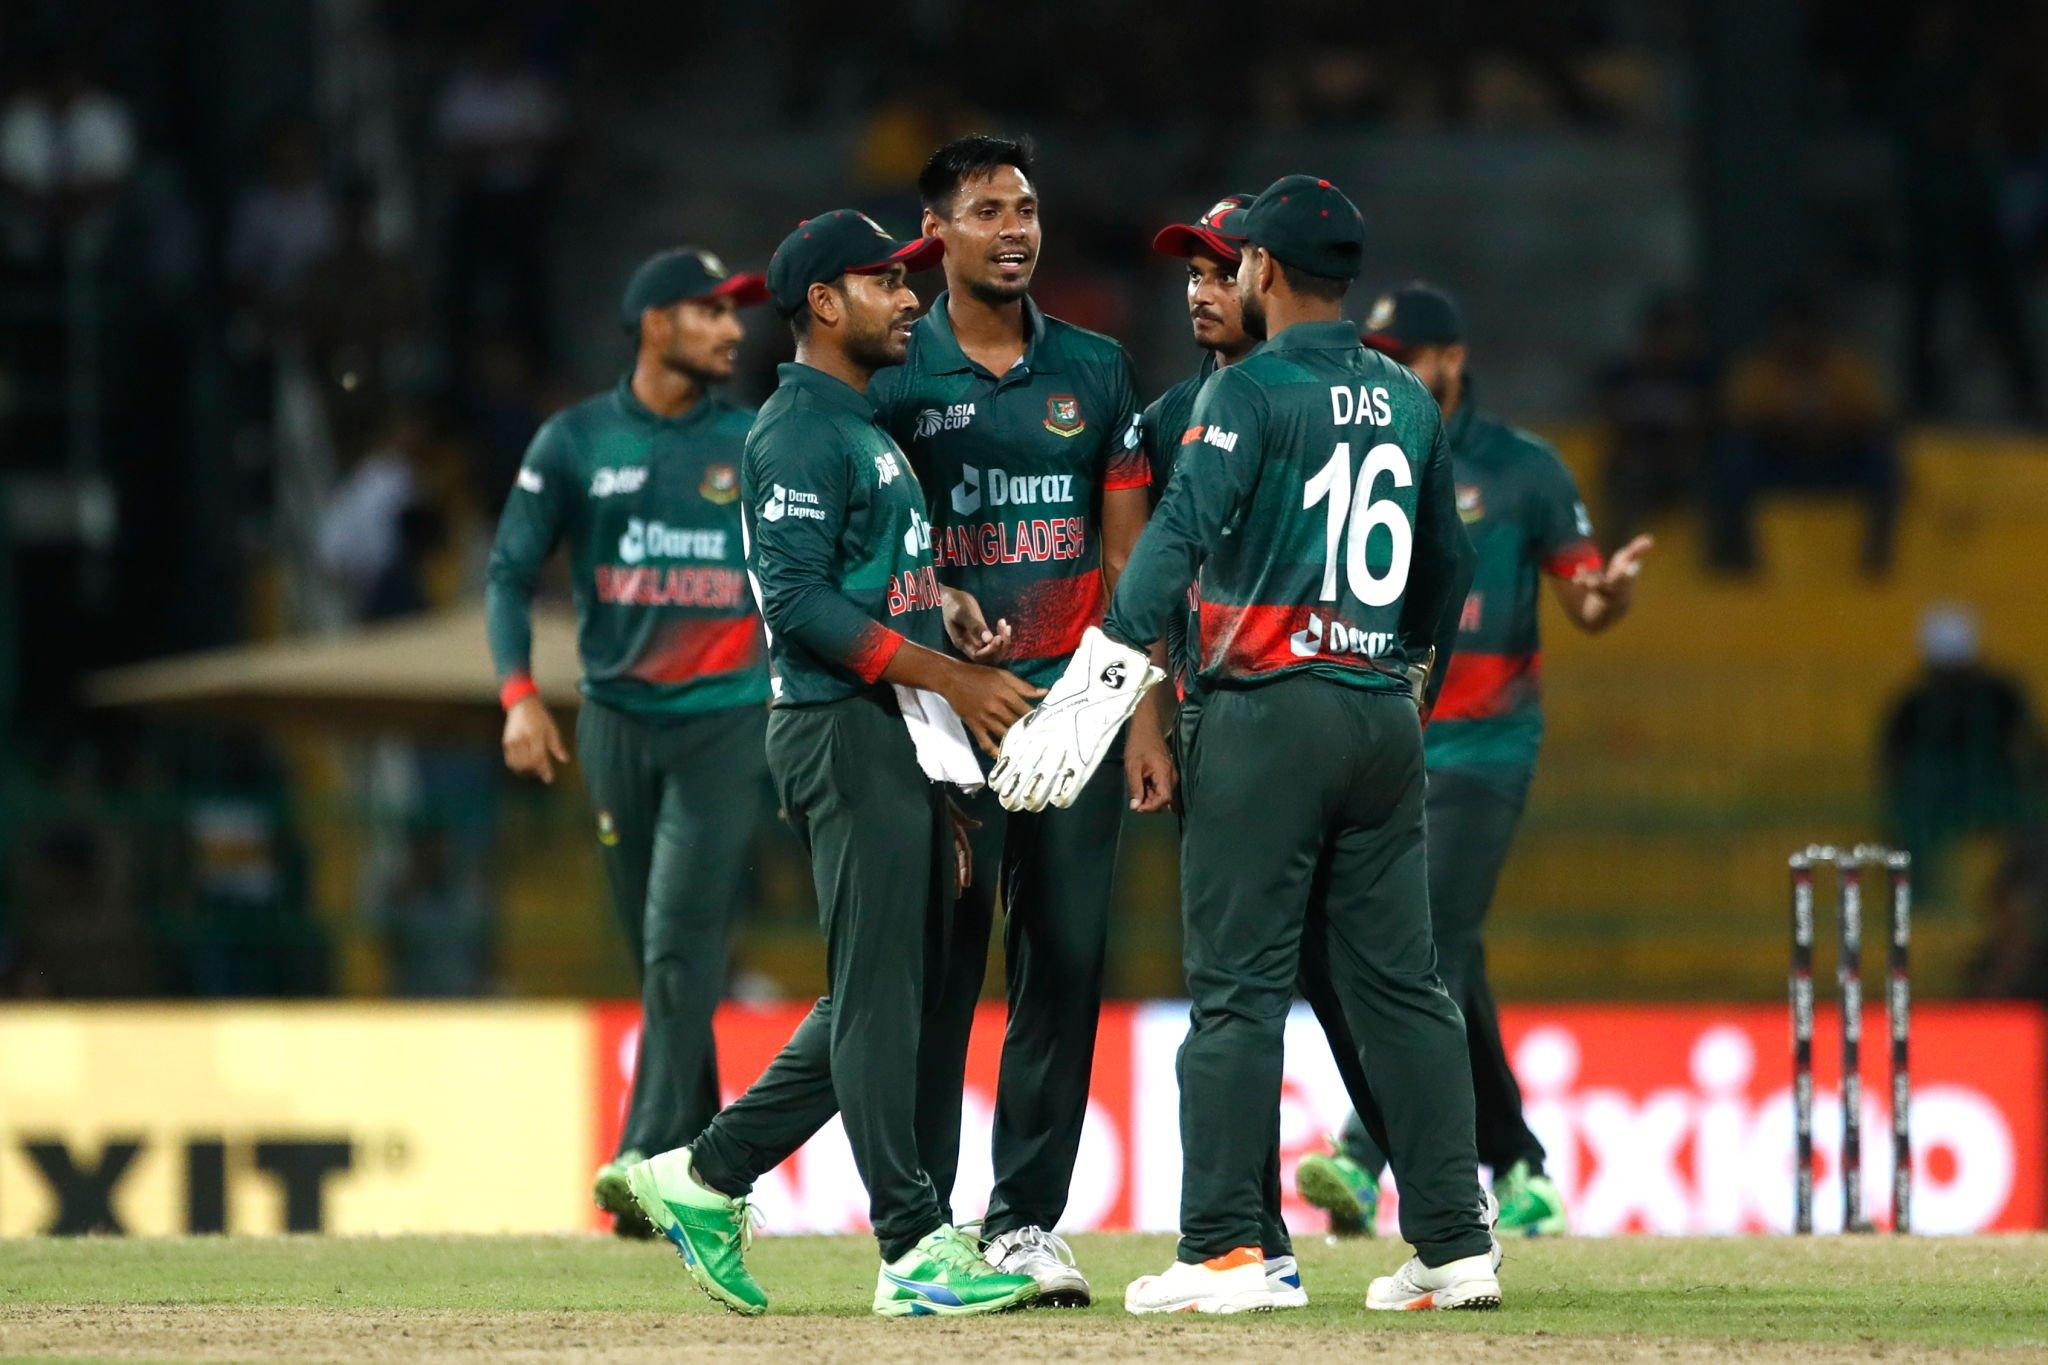 Bangladesh defeated India by 6 runs in the last match of the Asia Cup Super Four.